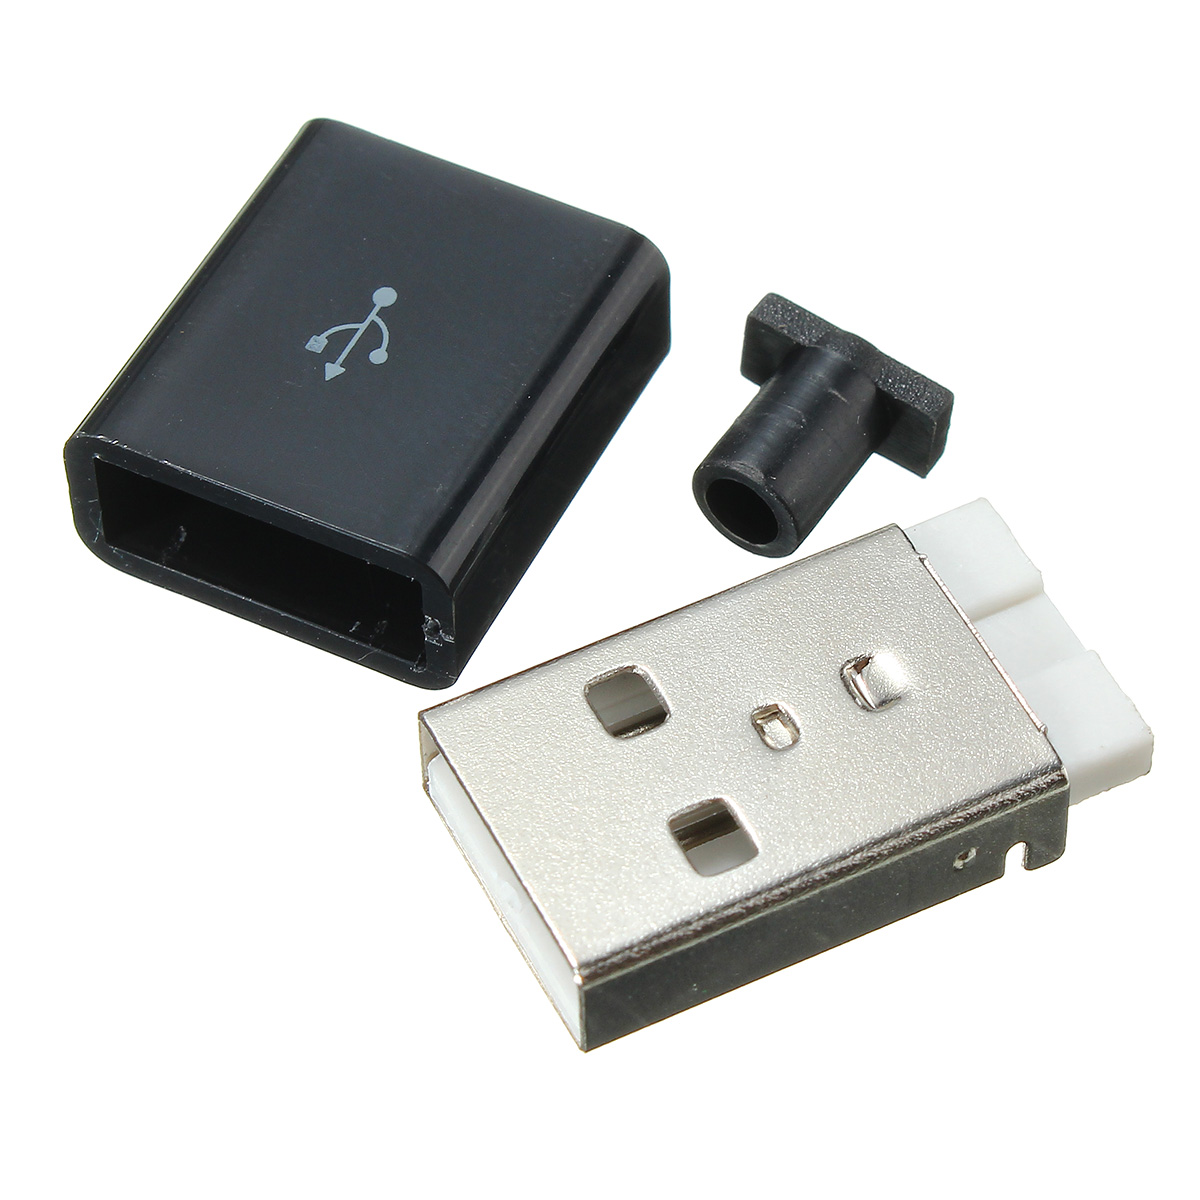 Find 1Pcs USB 2 0 Type A Plug 4 pin Male Adapter Solder Connector Black Cover Square for Sale on Gipsybee.com with cryptocurrencies